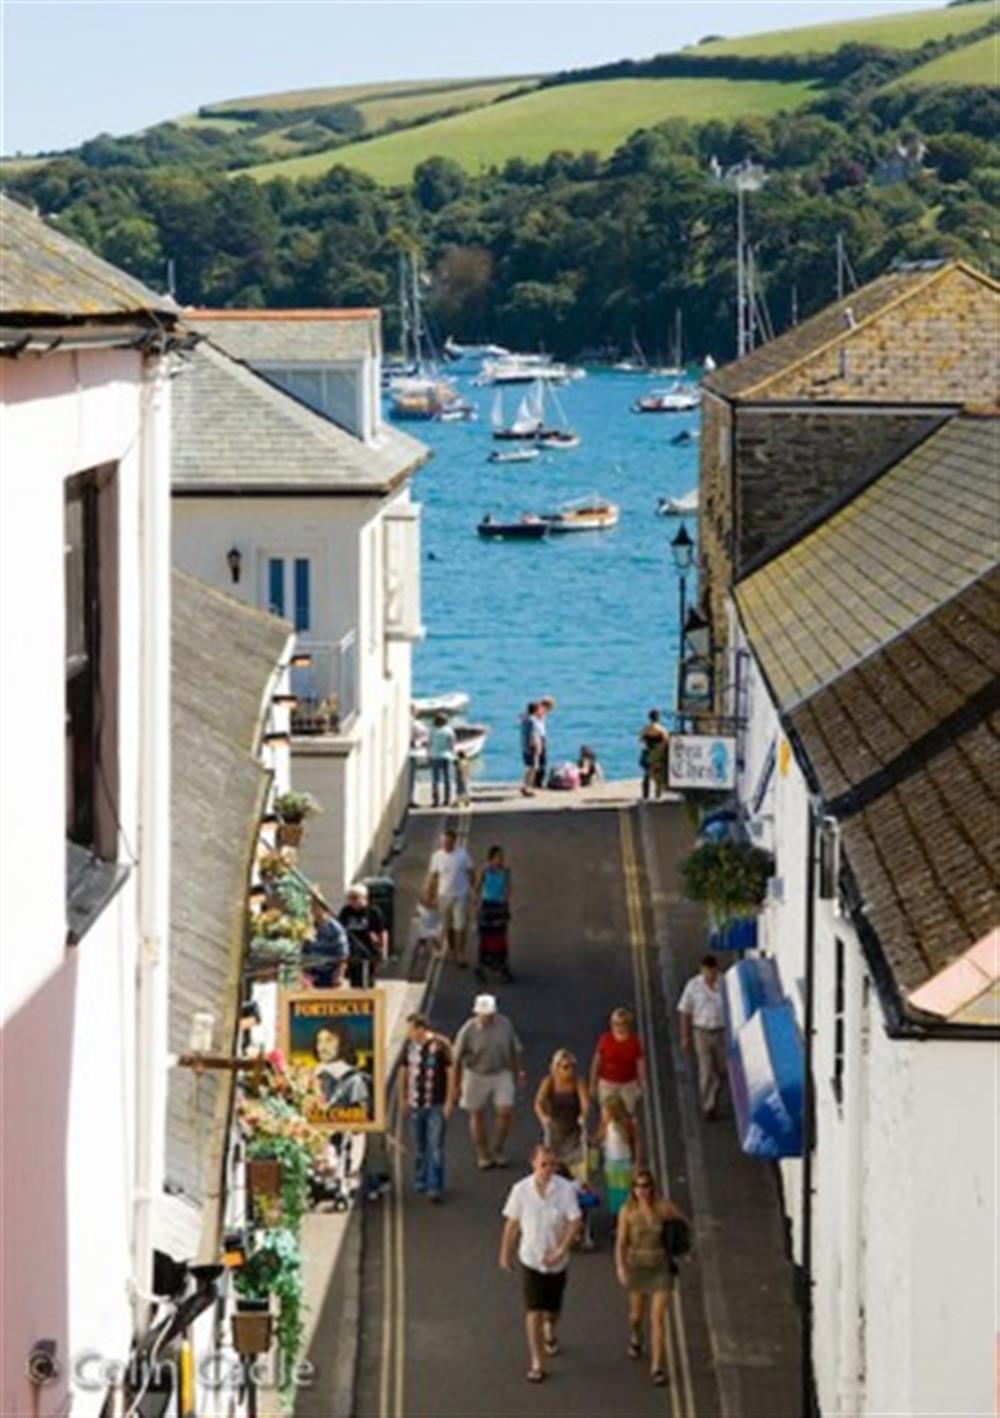 The narrow bustling streets in Salcombe.